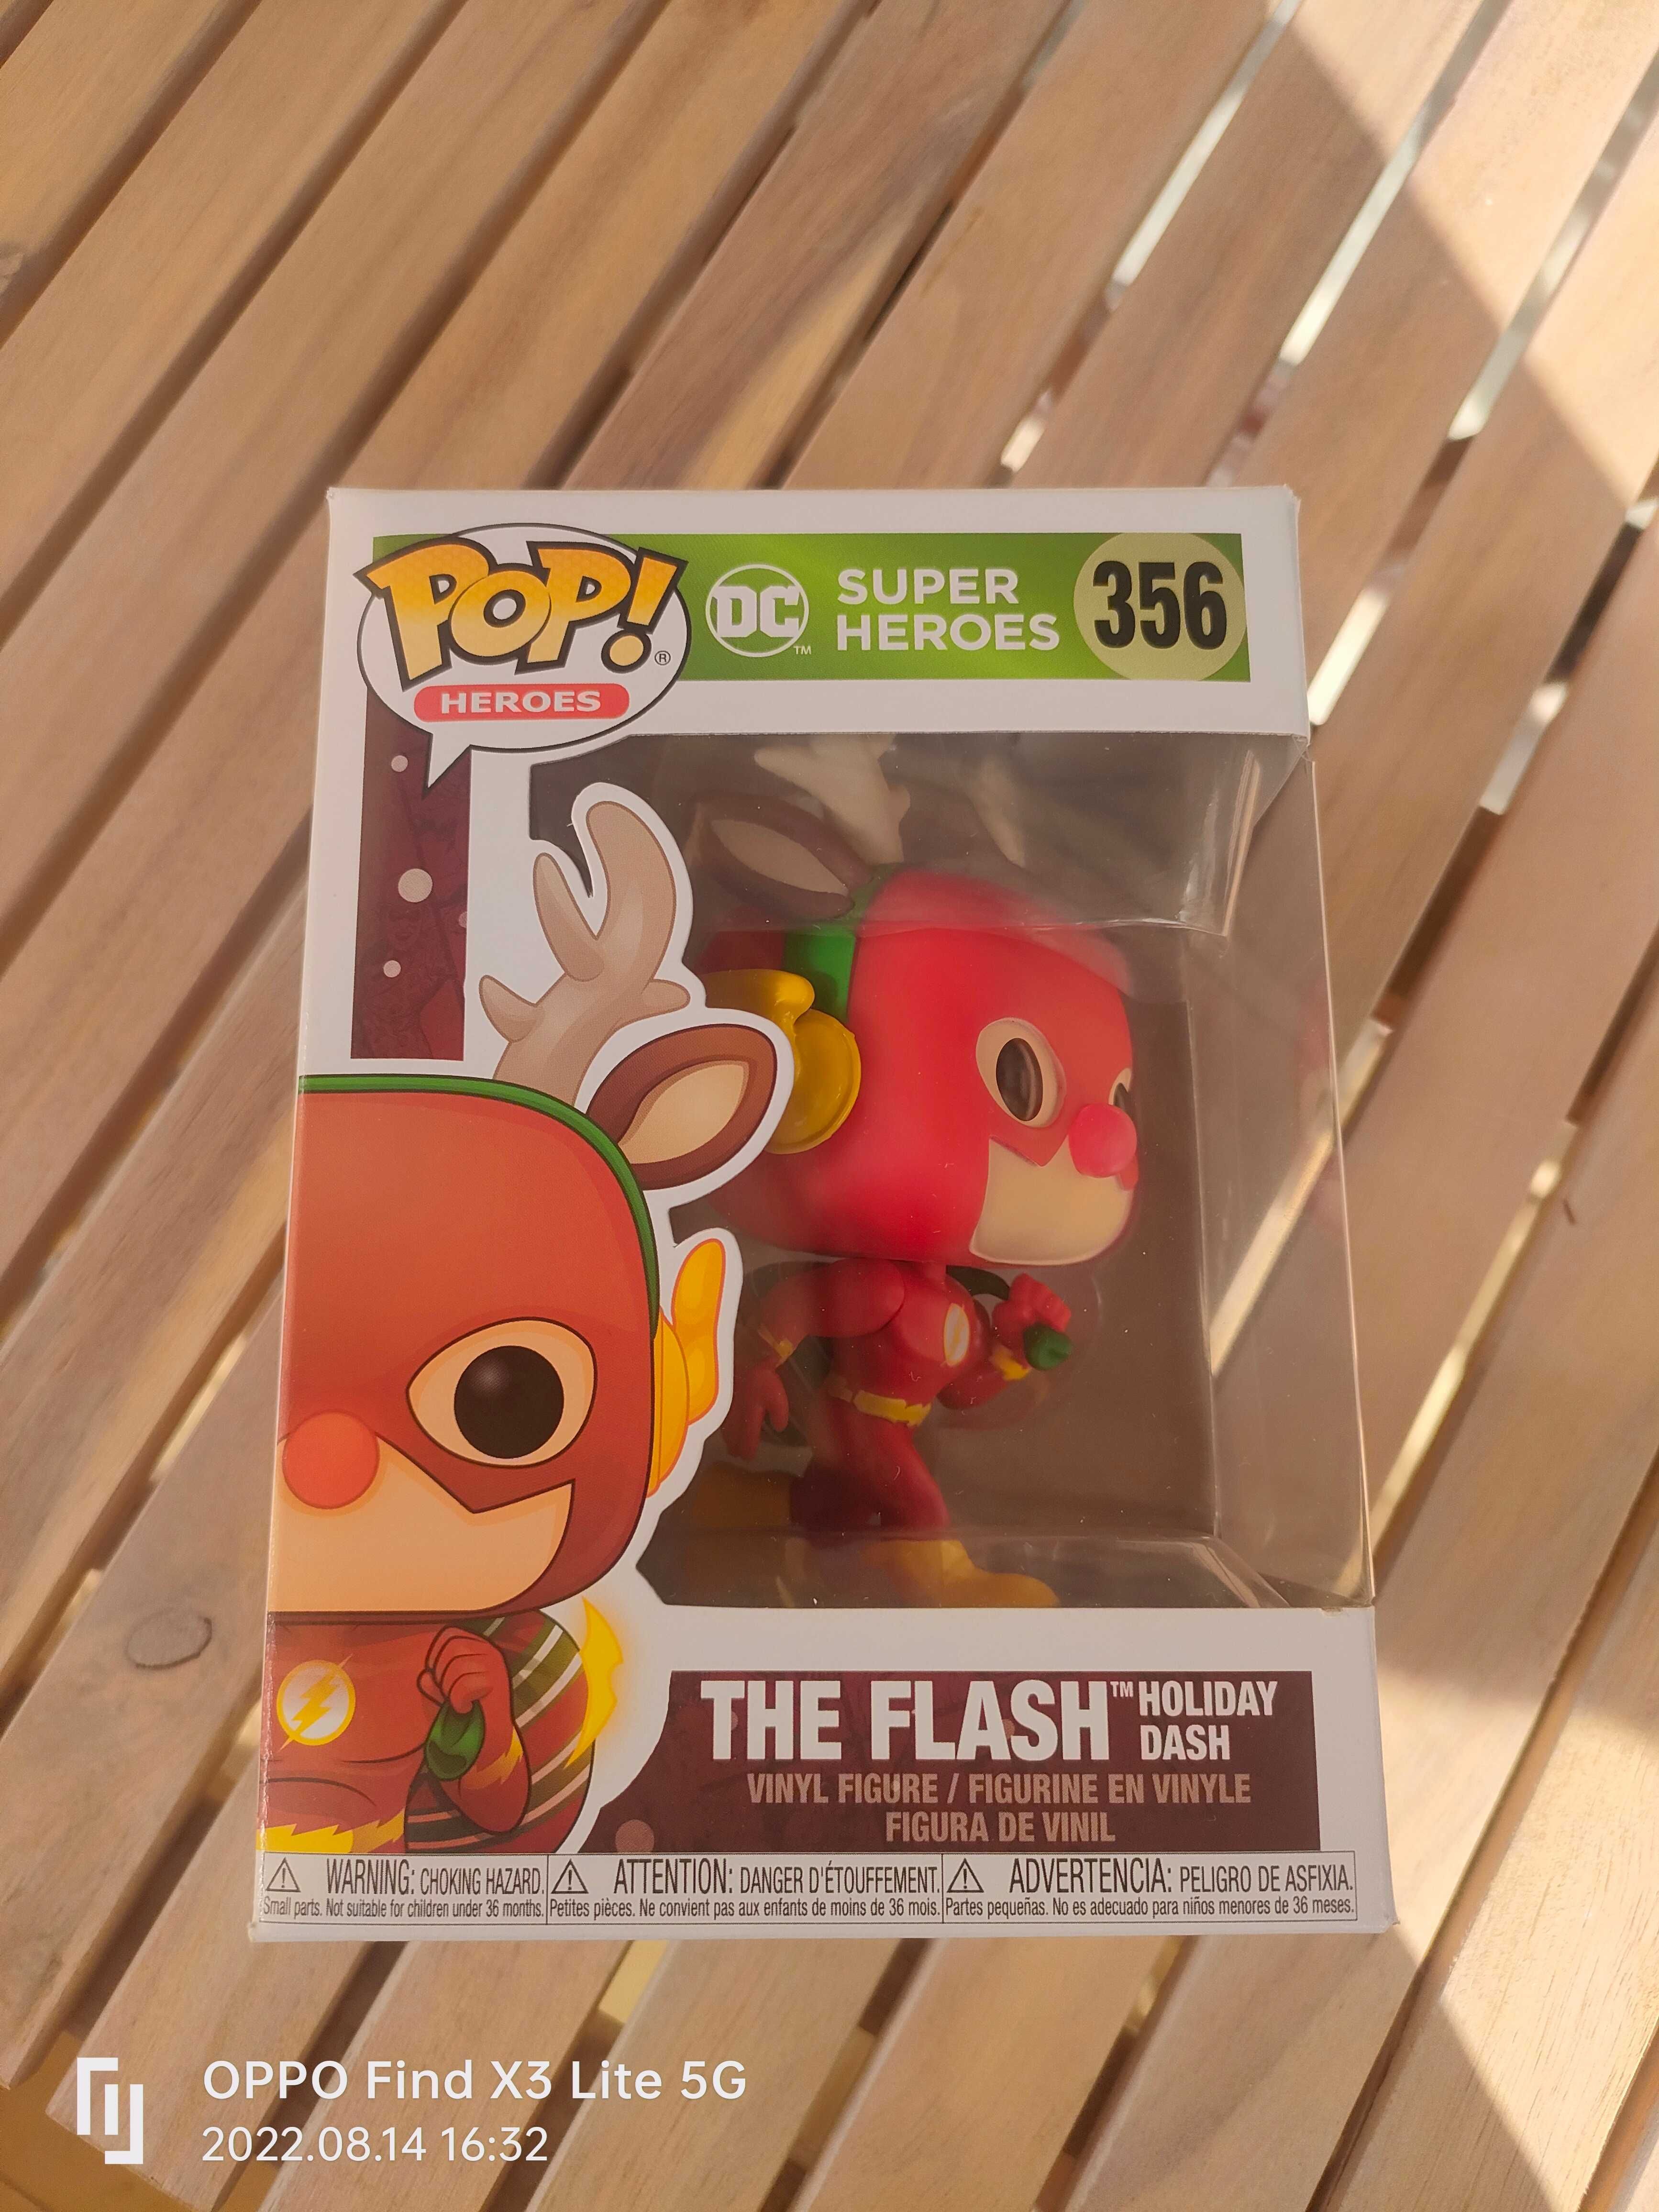 Funko pop heroes DC Super Heroes -
The Flash Holiday Dash